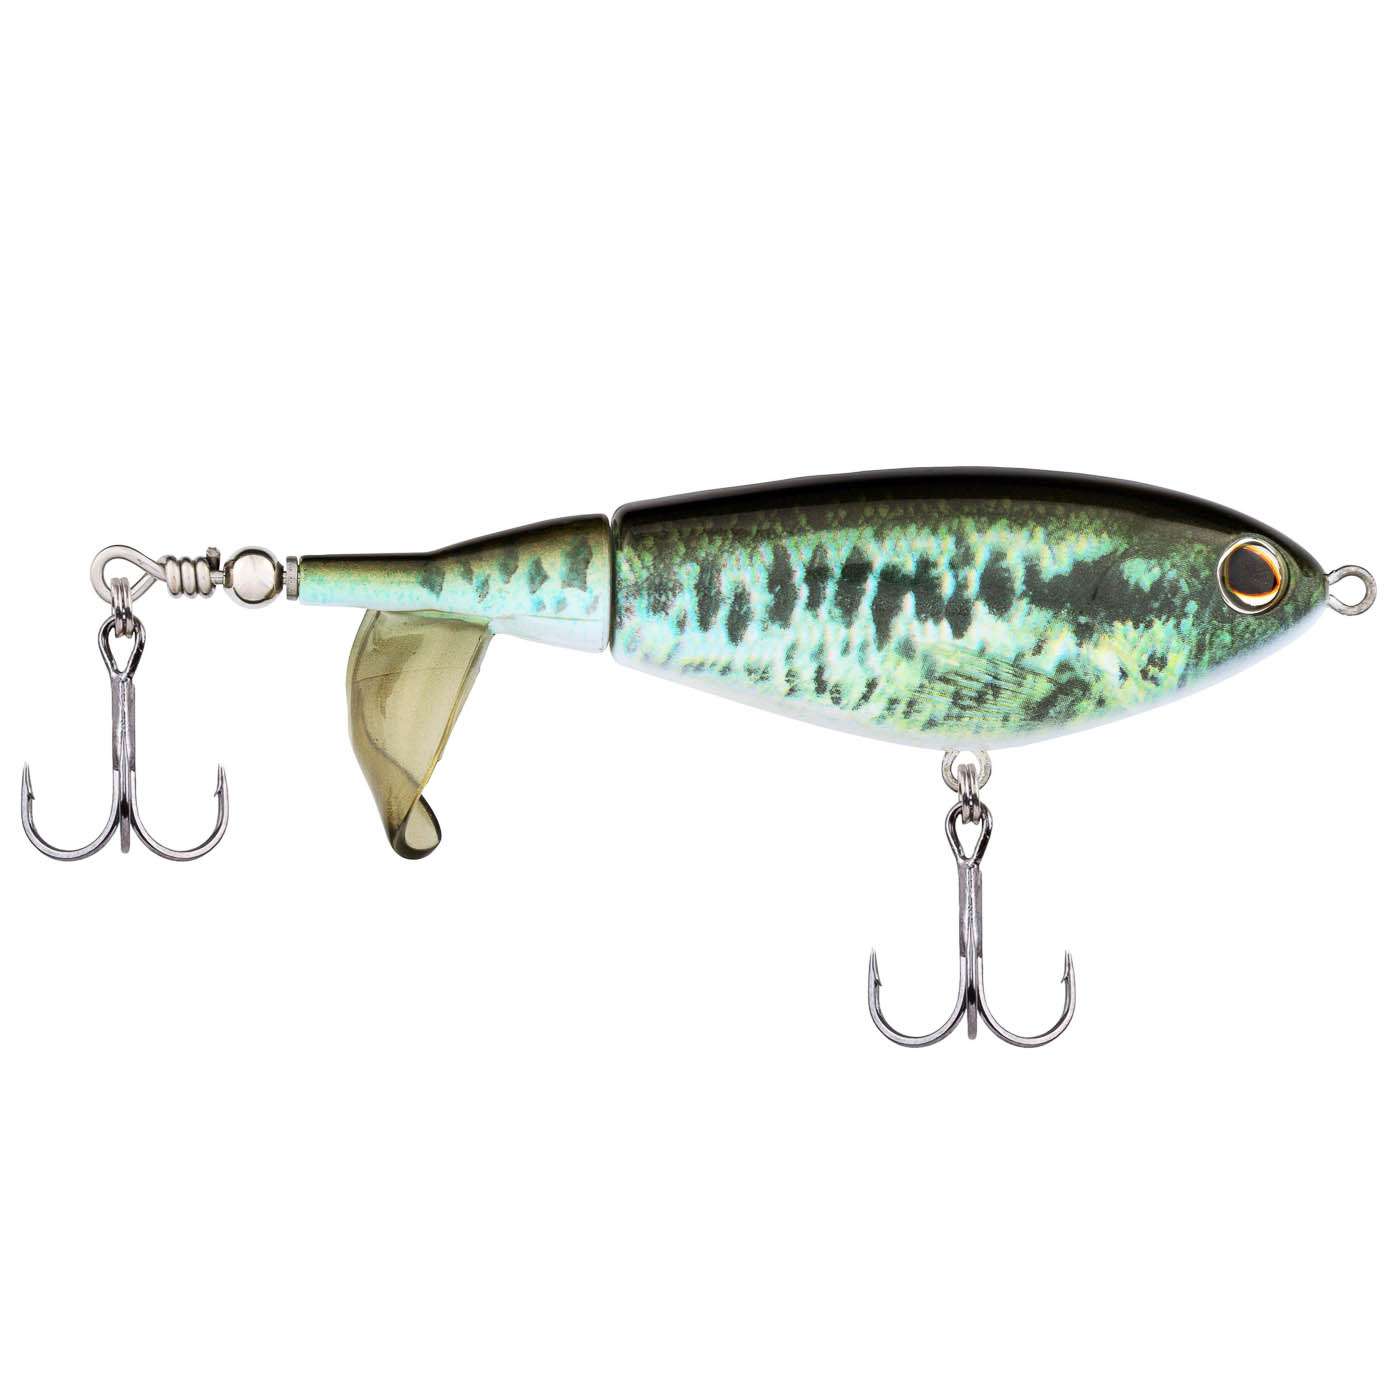 TWO BLACK NICKEL WILLOWLEAF BASS BOSS SPINNER BAITS-PICK SIZE & SKIRT COLOR 